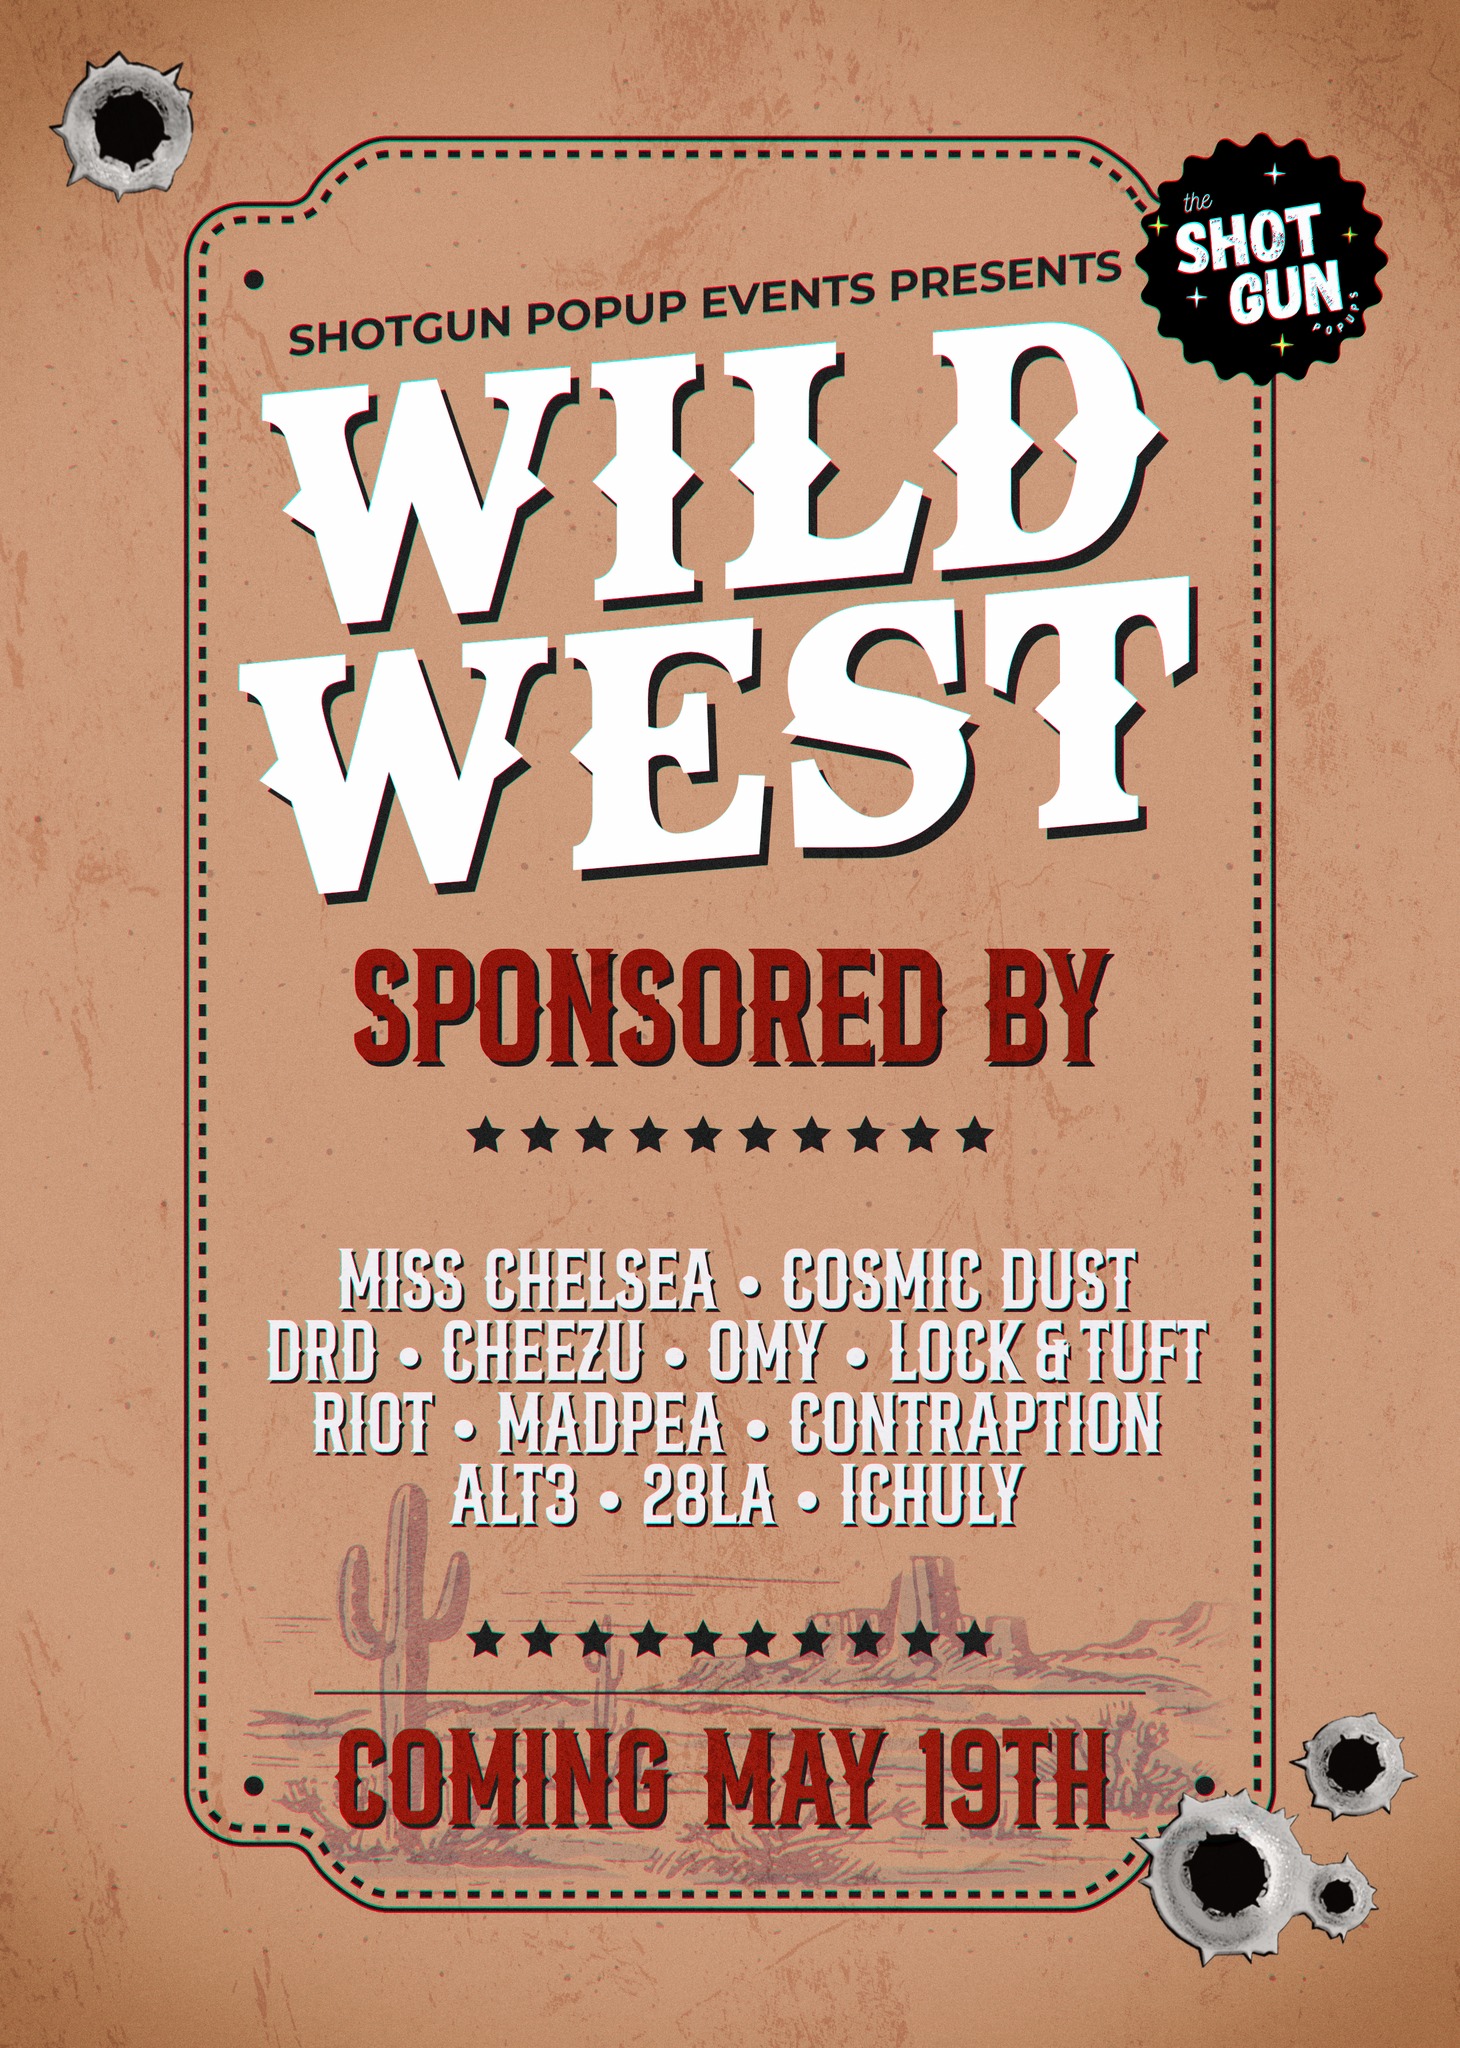 WELCOME TO THE WILD, WILD WEST: BY SHOT GUN EVENTS!